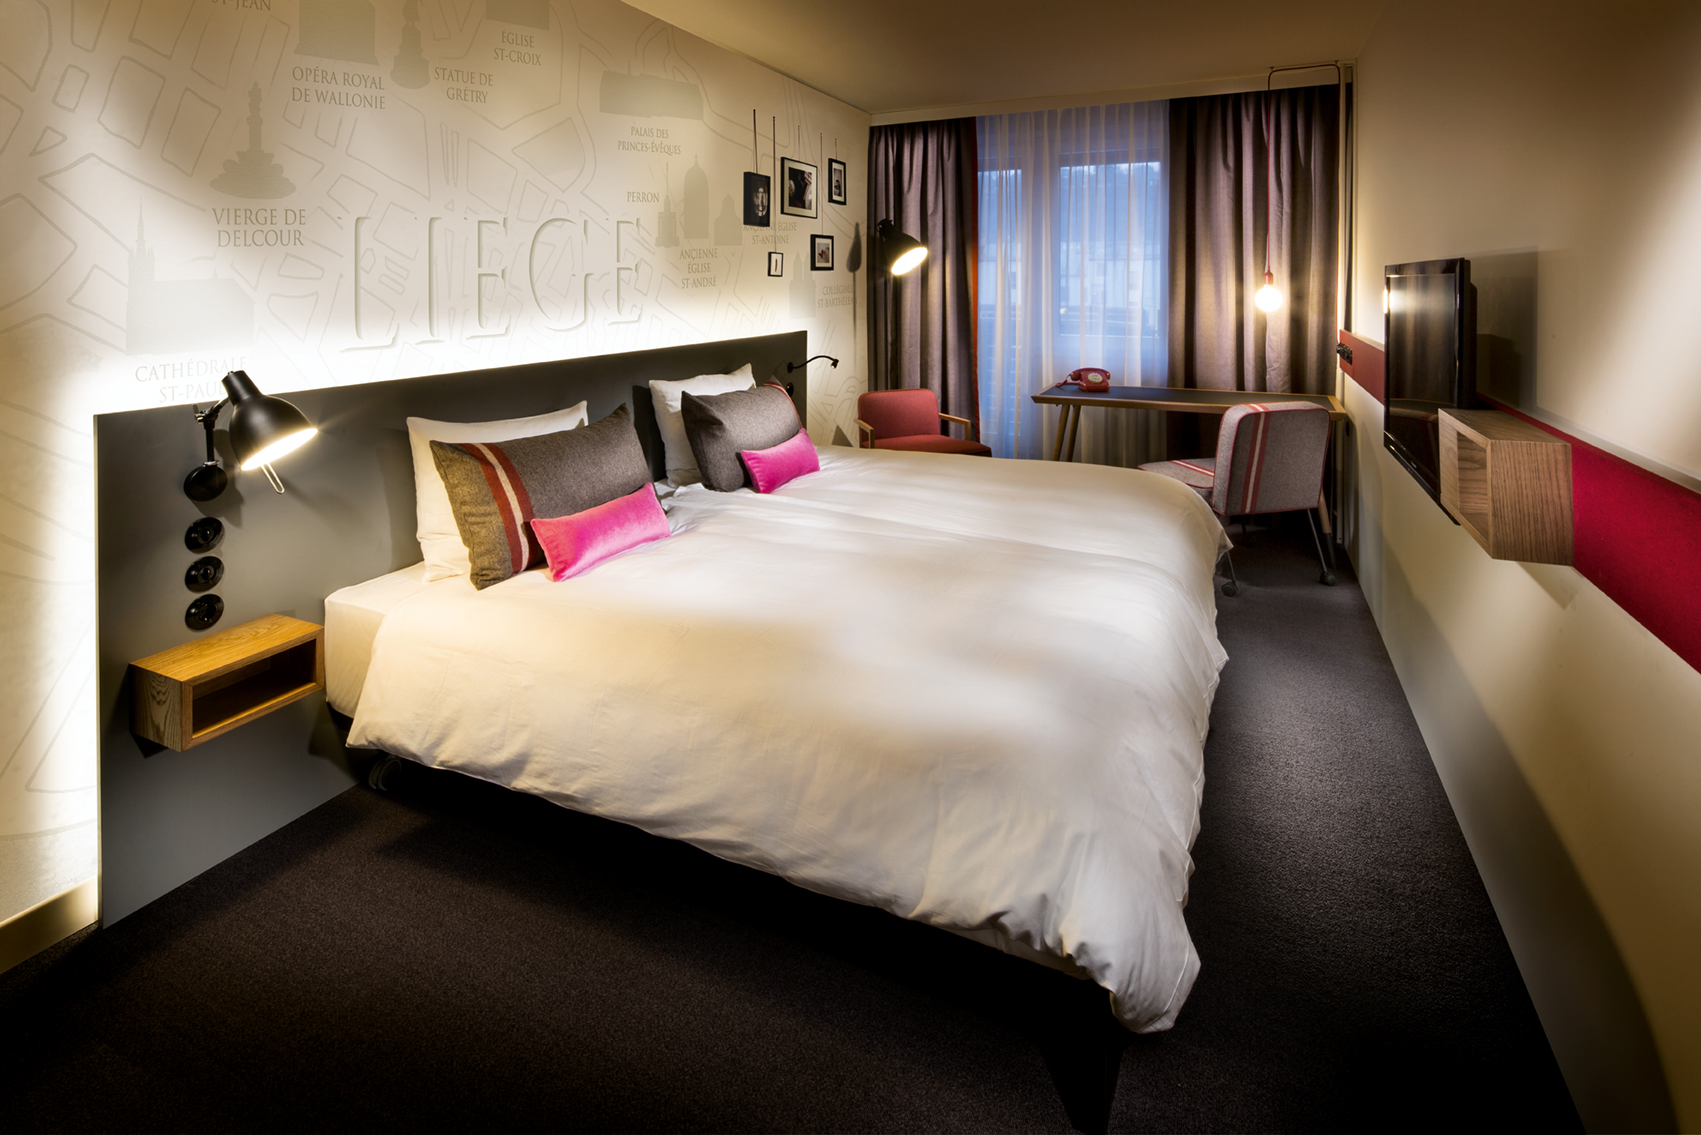 A double room at the Pentahotel Liege